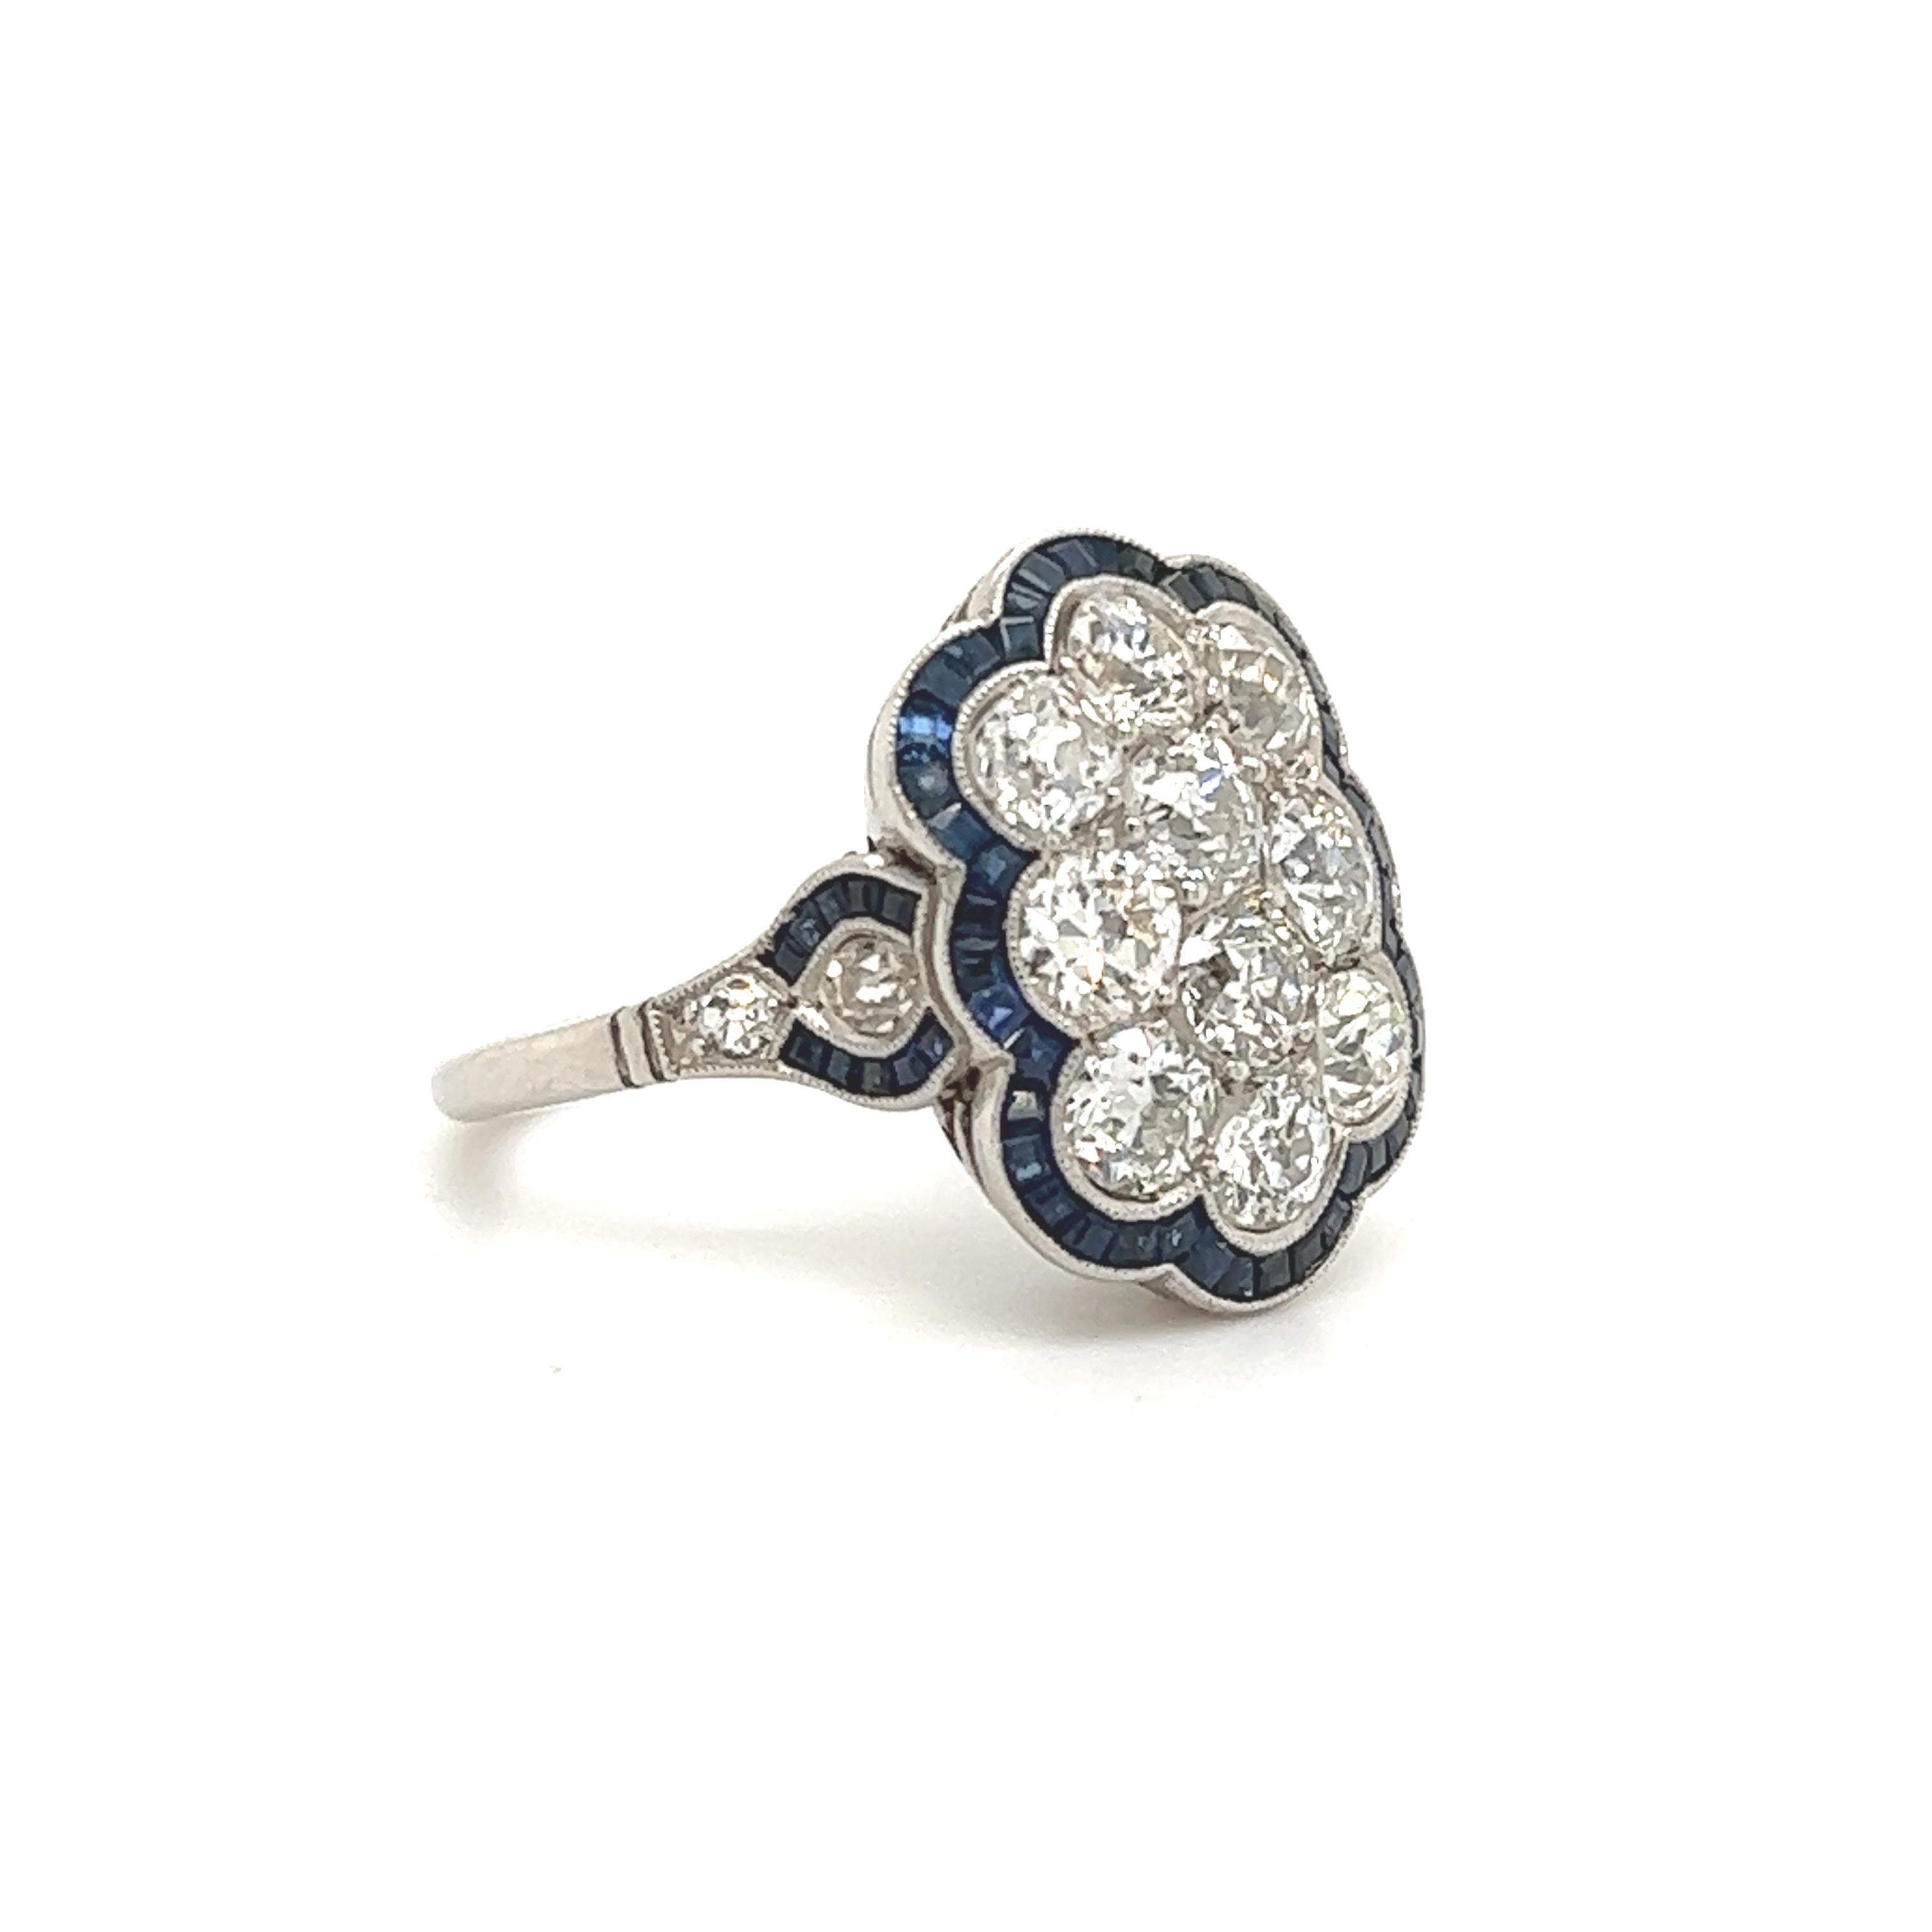 Fantastic design seen on this Art Deco treasure. This ring is crafted in platinum. The ring is set with old European cut diamonds and vivid blue sapphires in baguette shape.  The diamonds in the design are set in a honeycomb pattern, with each